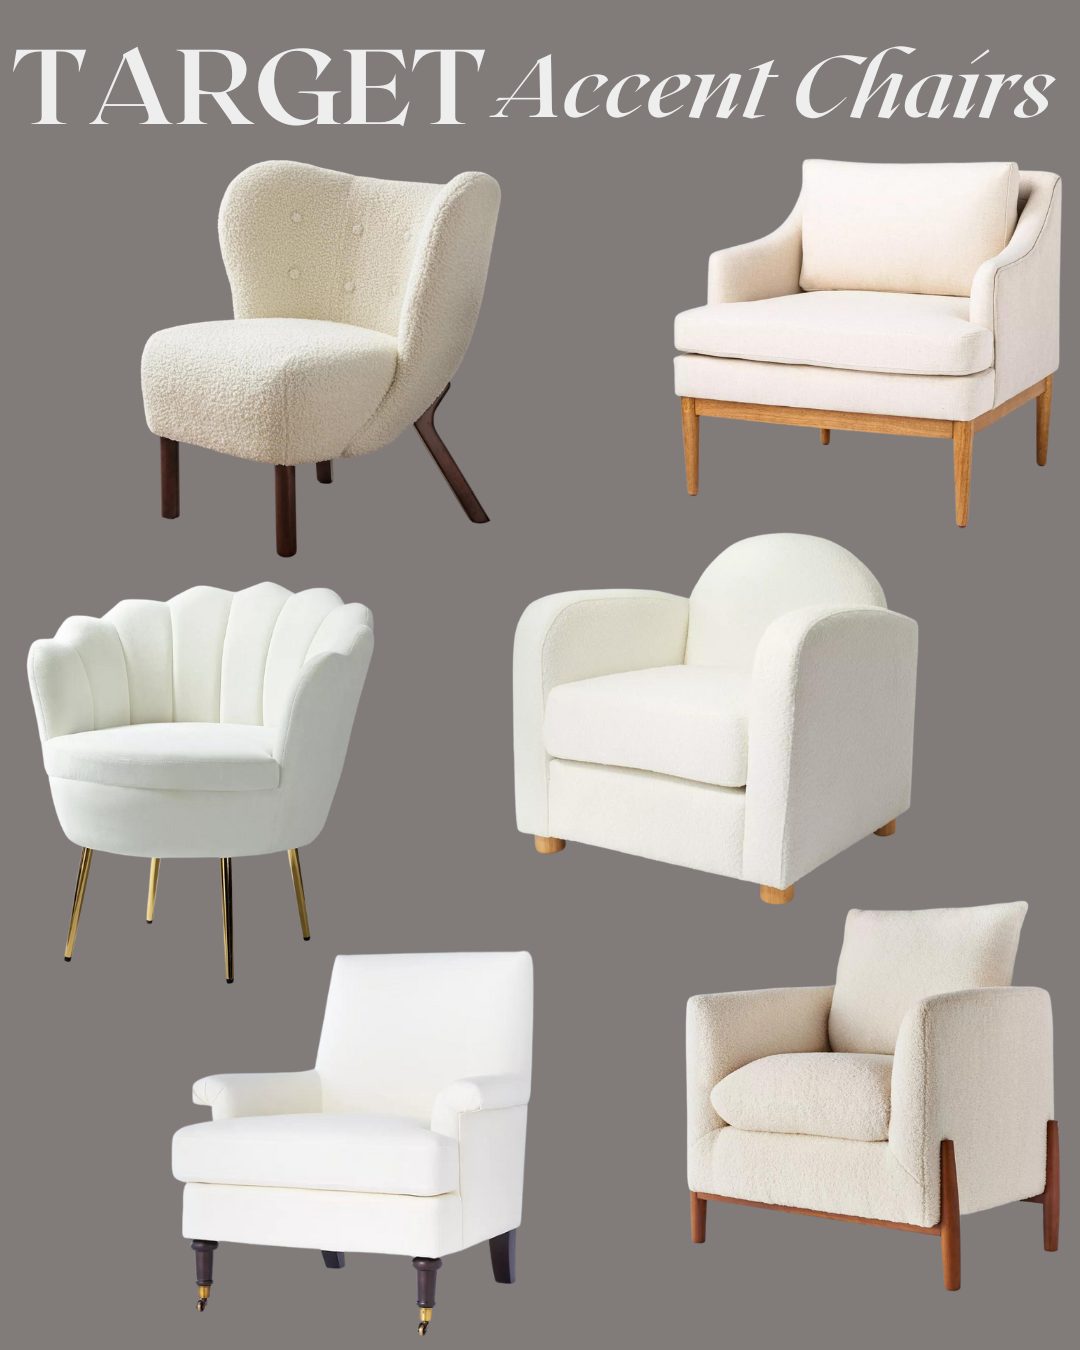 Target Accent Chairs: Accent Chairs from Target